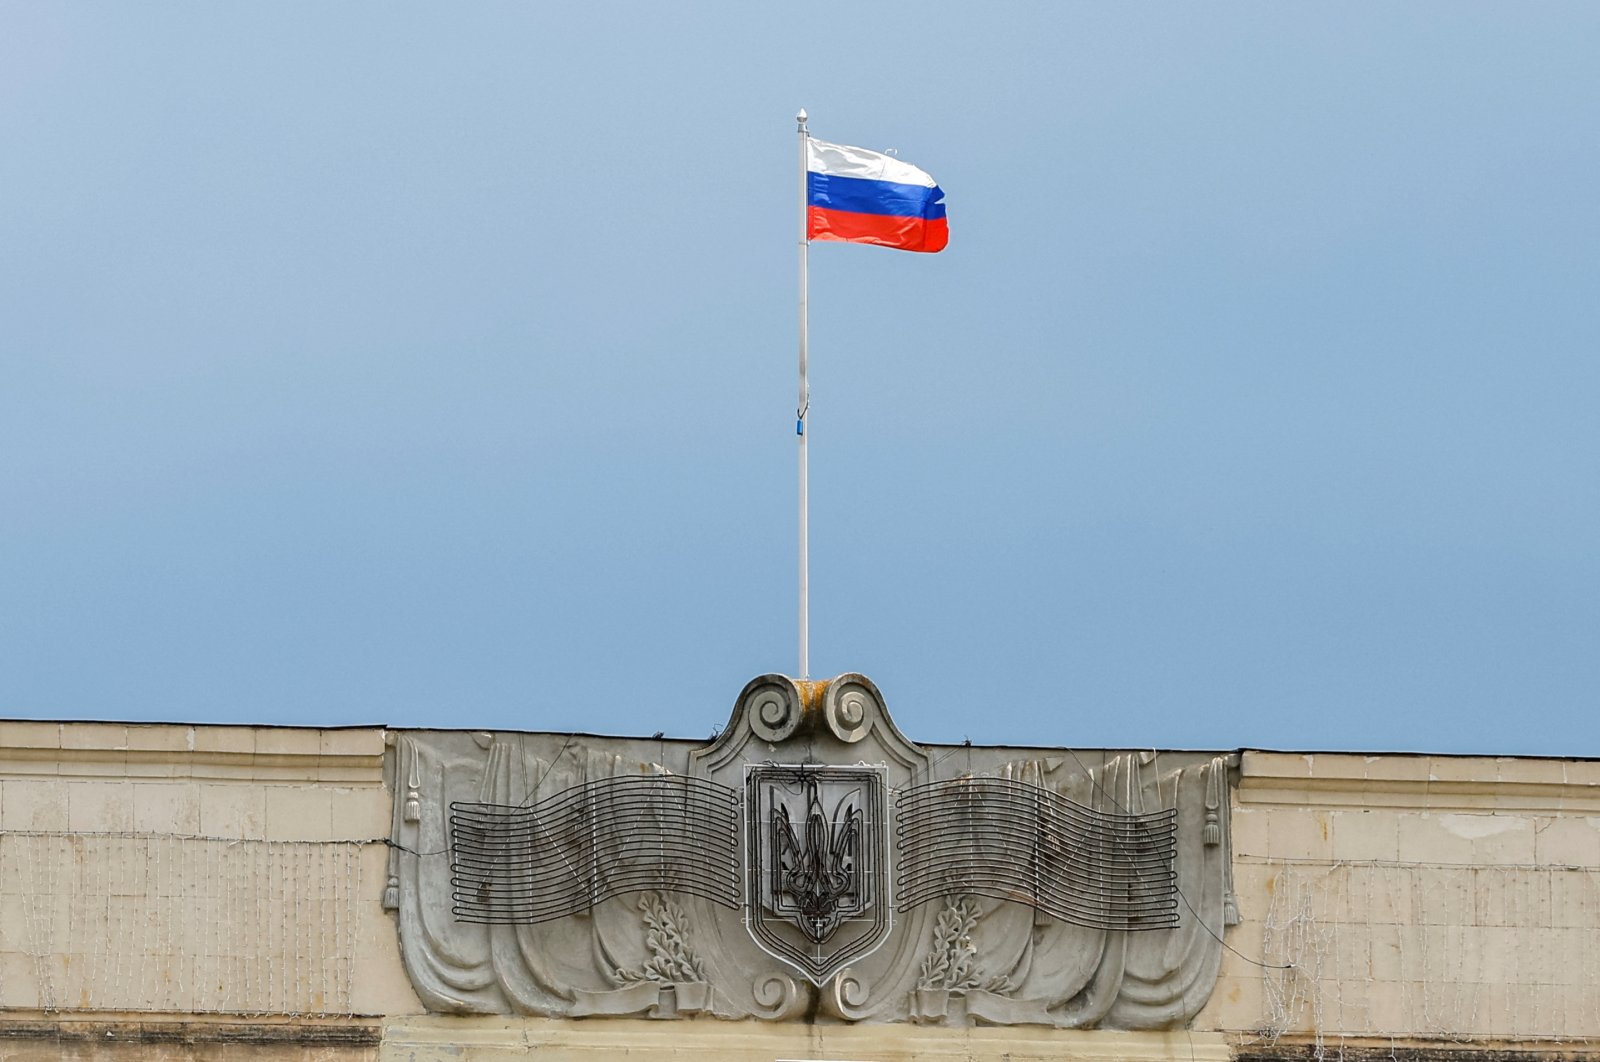 A Russian flag flies above the Ukrainian coat of arms dismantled from a former regional council&#039;s building during the Ukraine-Russia conflict in the Russia-controlled city of Kherson, Ukraine, July 25, 2022. (Reuters Photo)